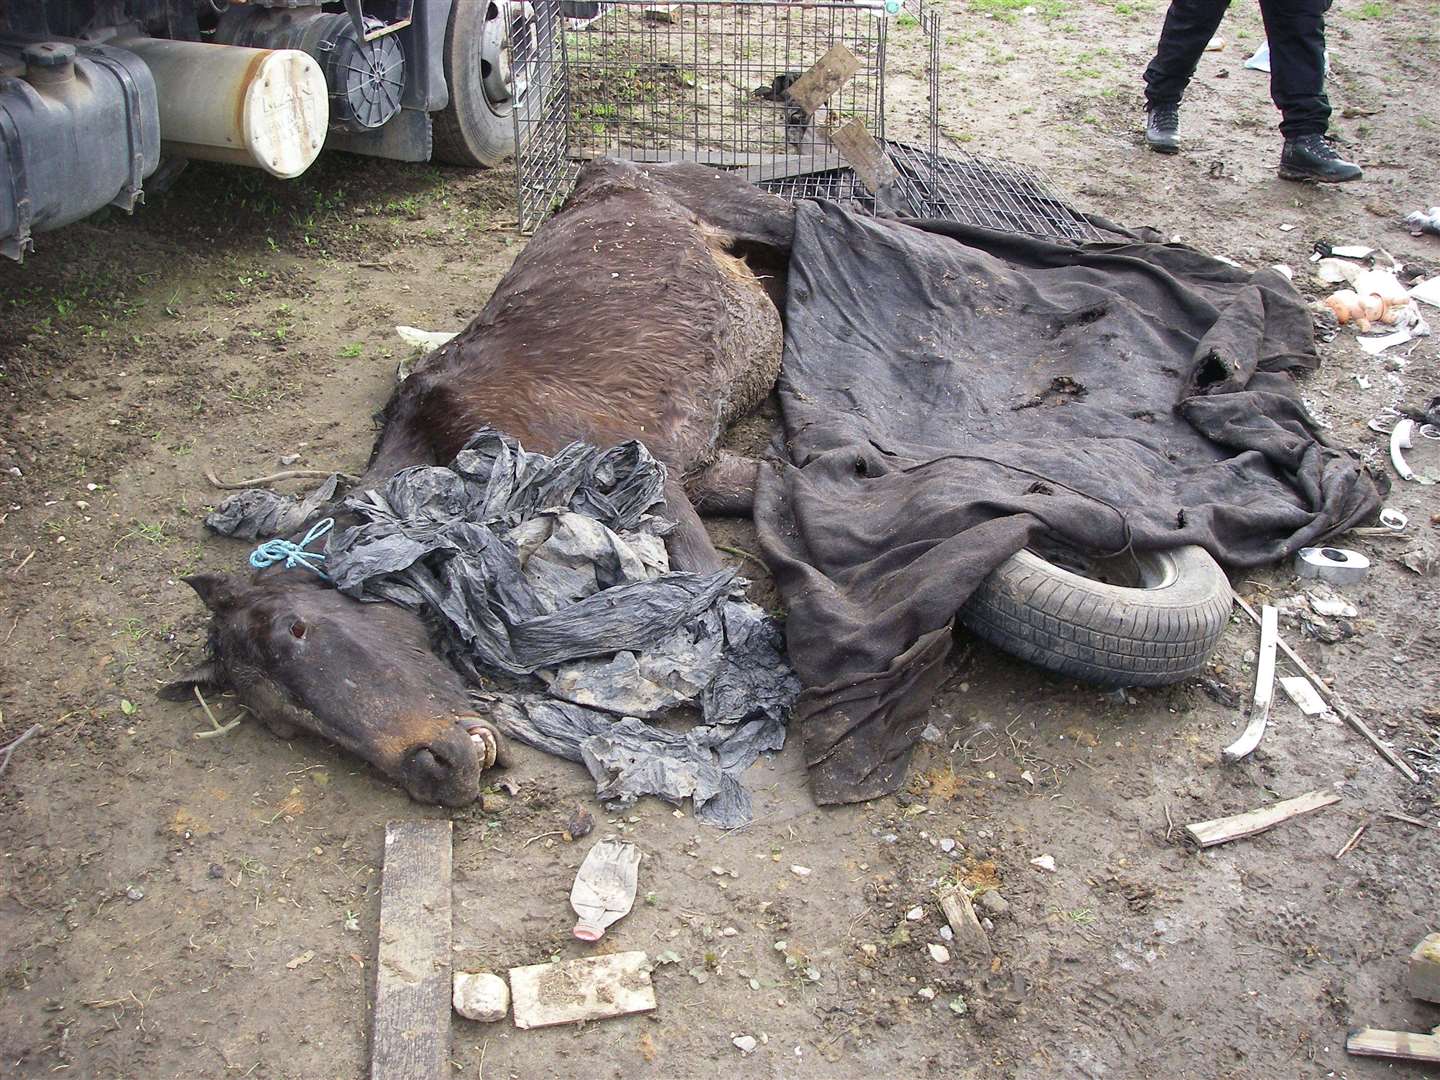 A foal and mare belonging to Samuel Powell were found emaciated and covered in fleas